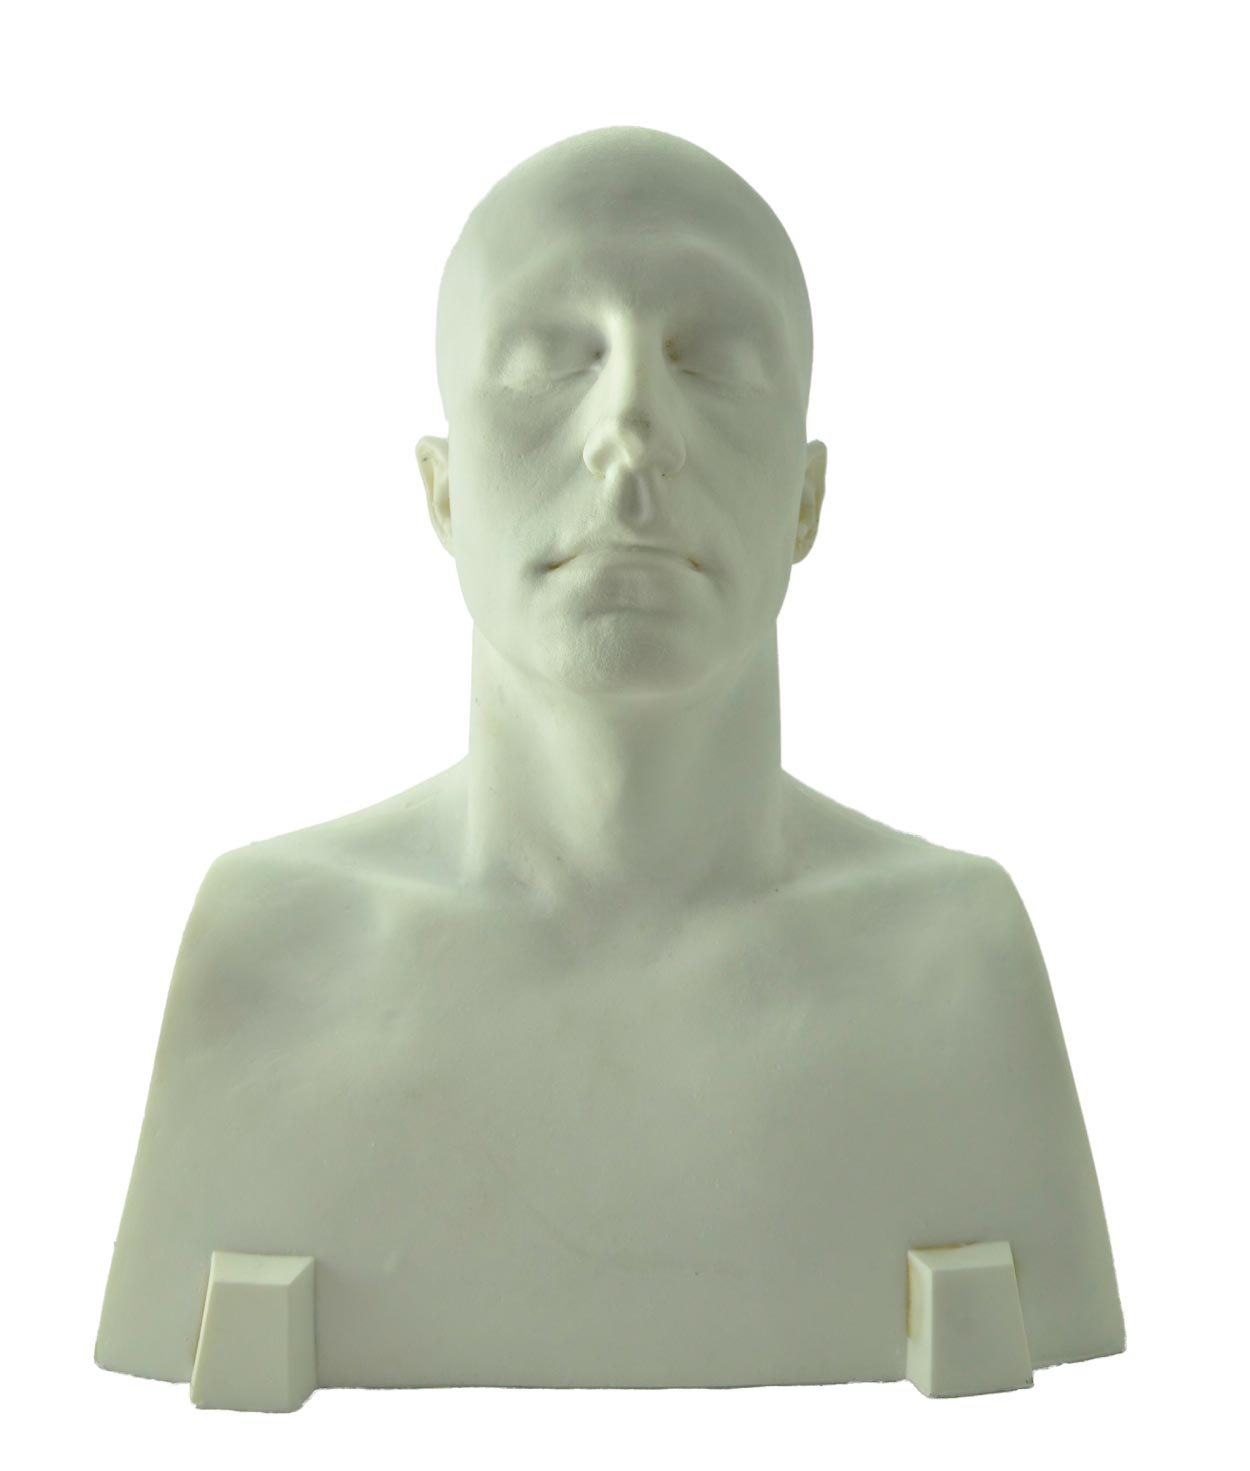 modified tate model ceramic armor different nose shapes